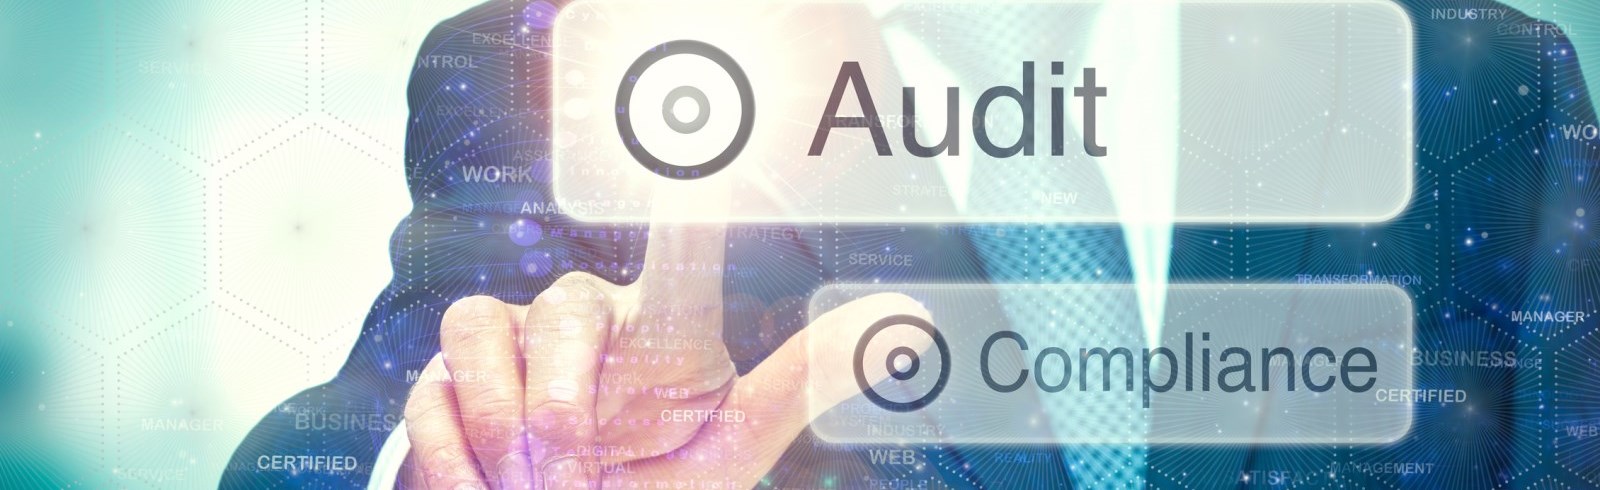 Audit concept on a computer display